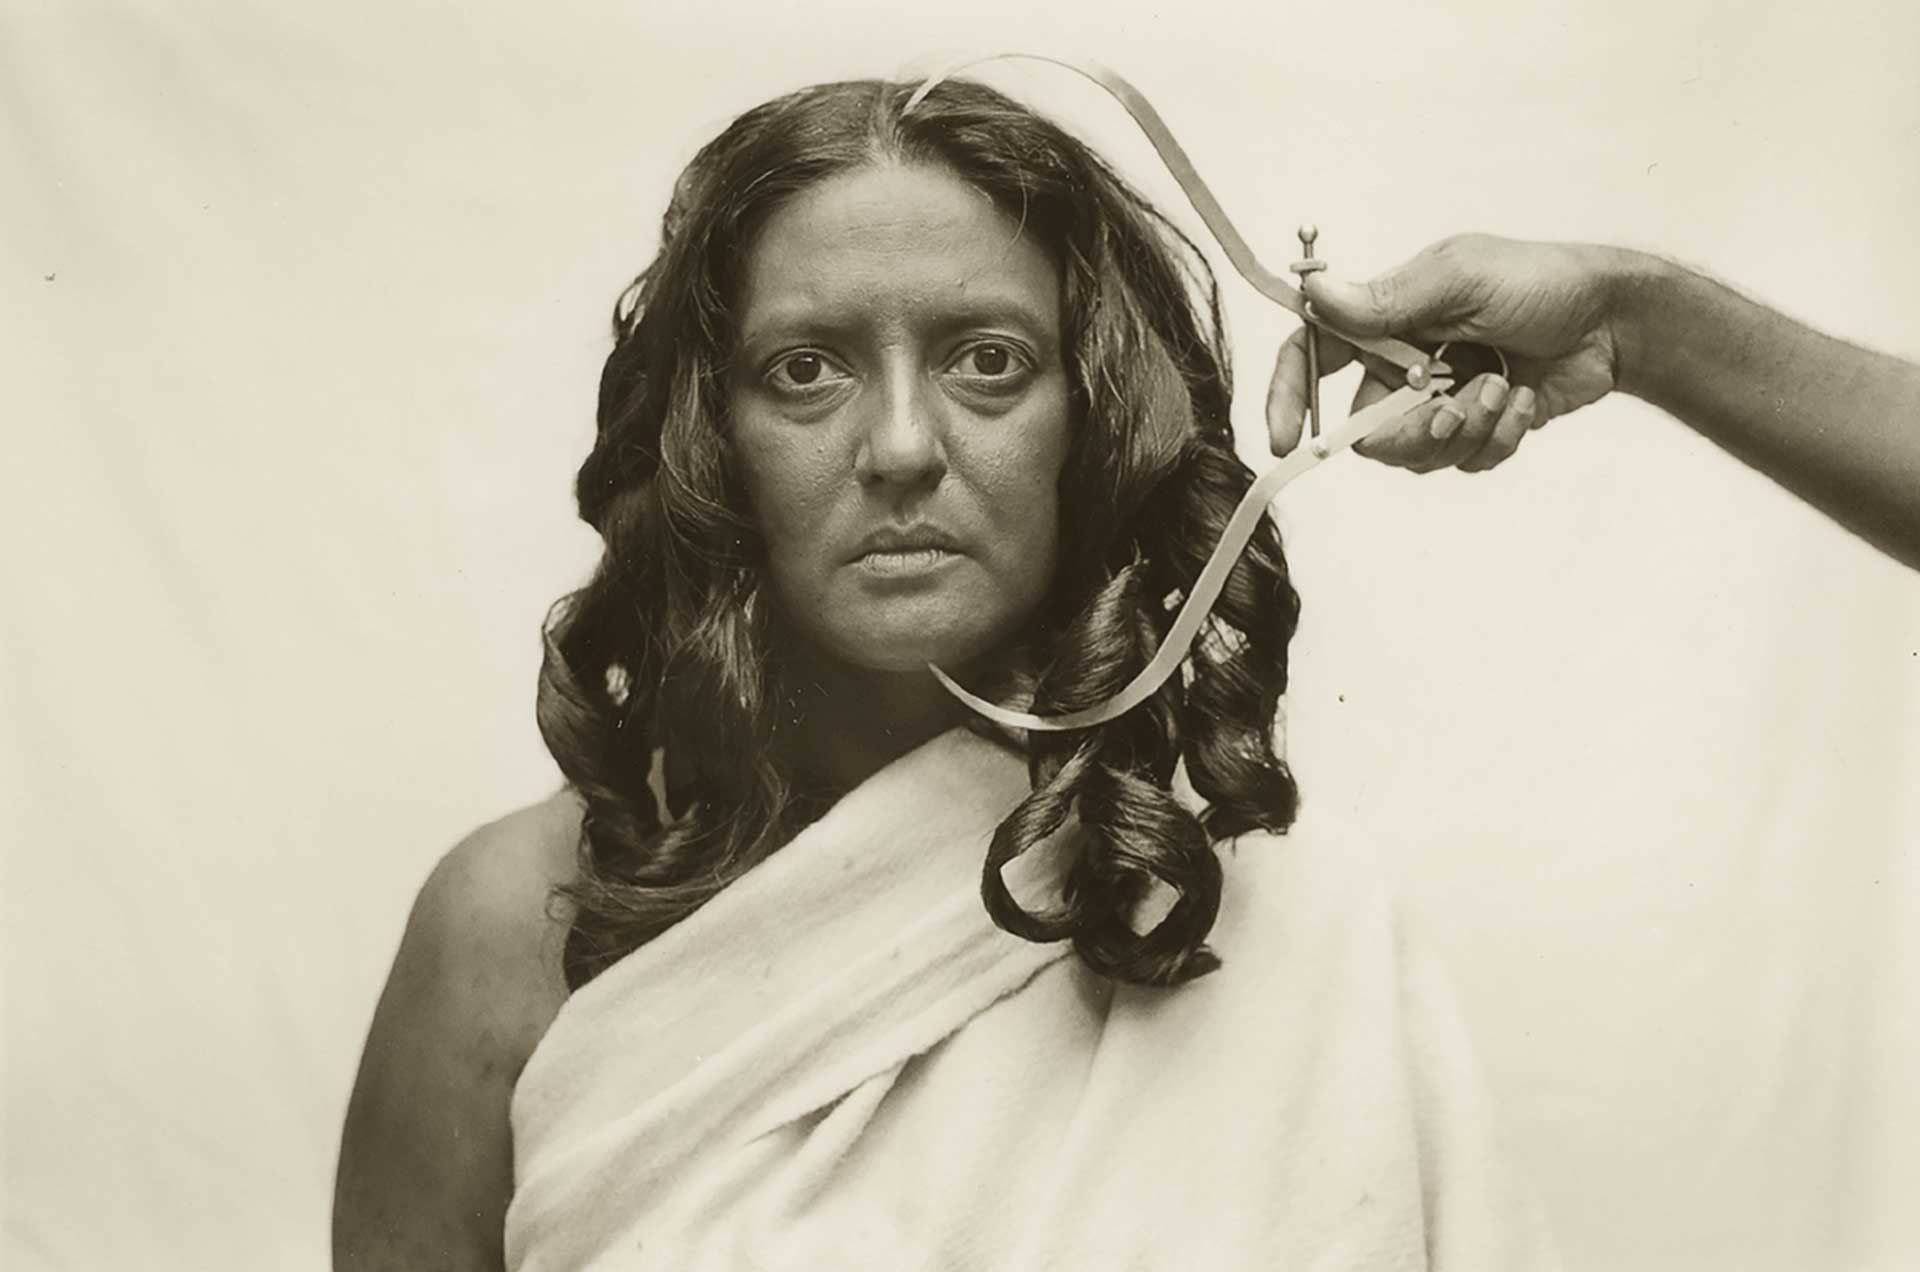 In the centre, a woman with hair curled in large ringlets looks straight ahead. From the right, a hand emerges holding a measuring device next to her face.